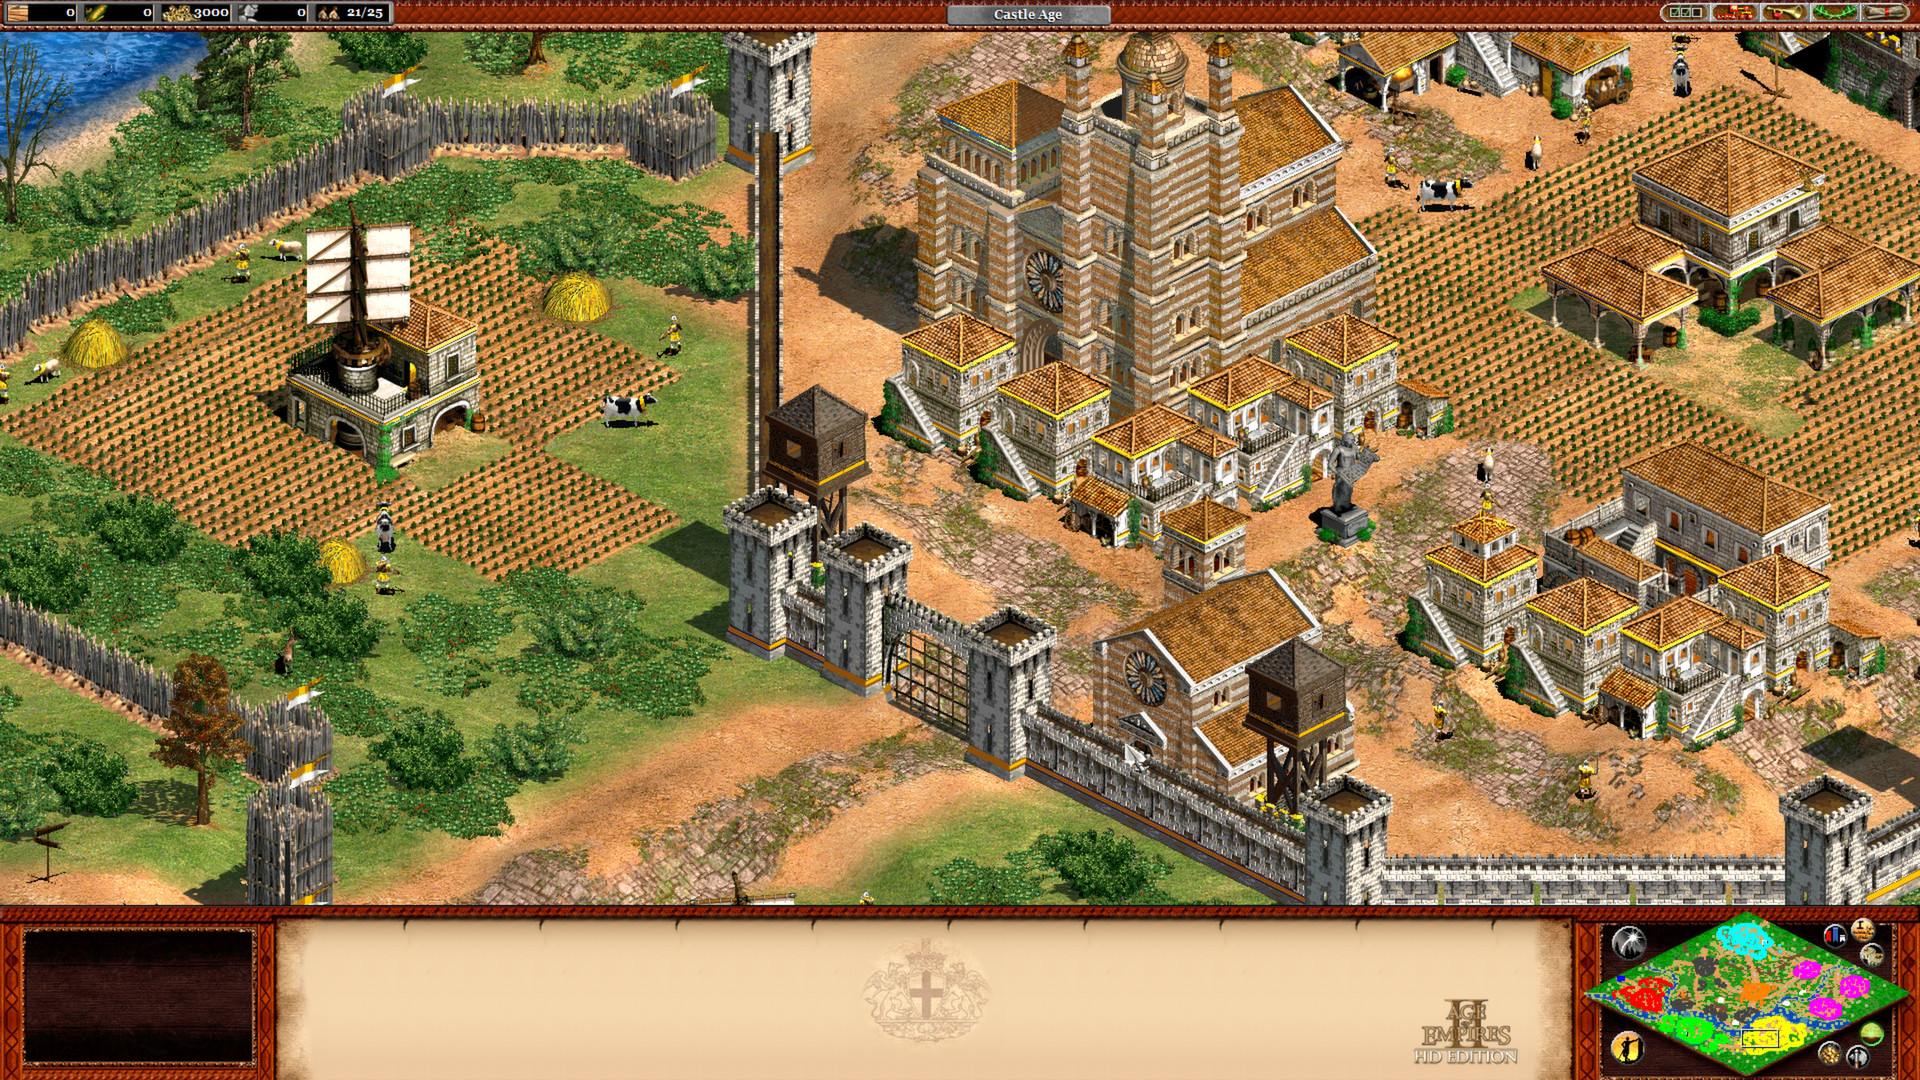 Age Of Empires II: The Forgotten High Quality Background on Wallpapers Vista